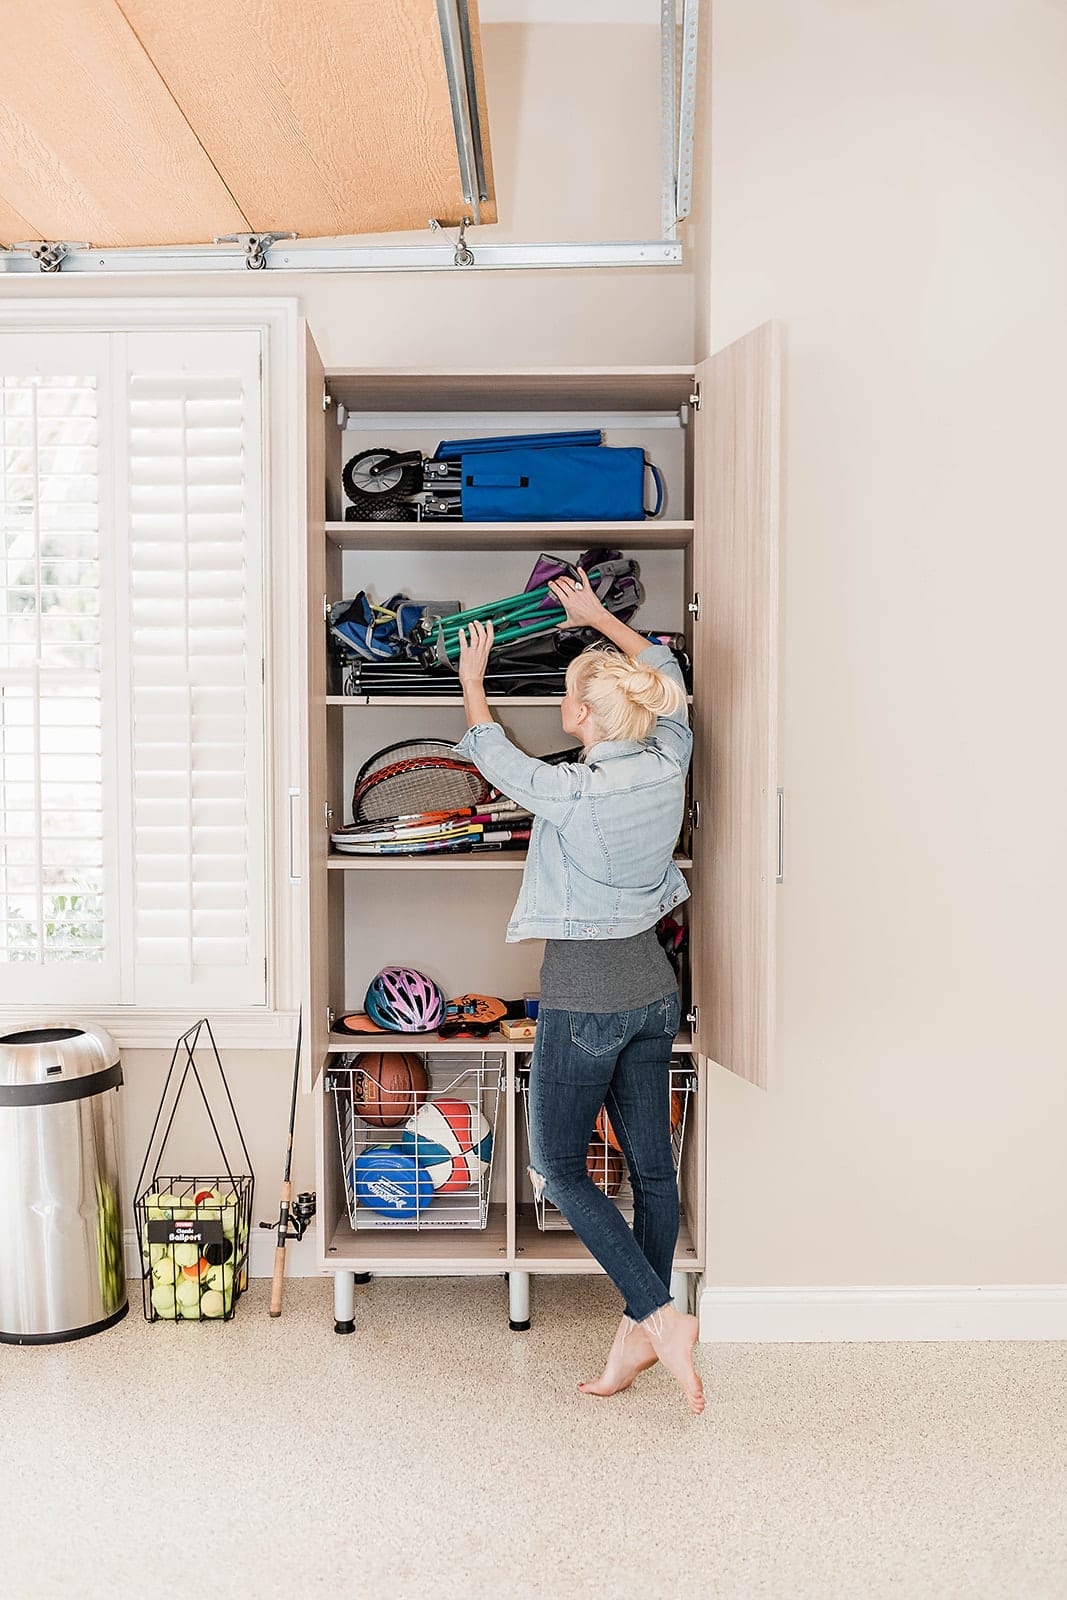 Garage organization cabinets made by California Closets. Tips for building custom cabinetry for organizing your garage.